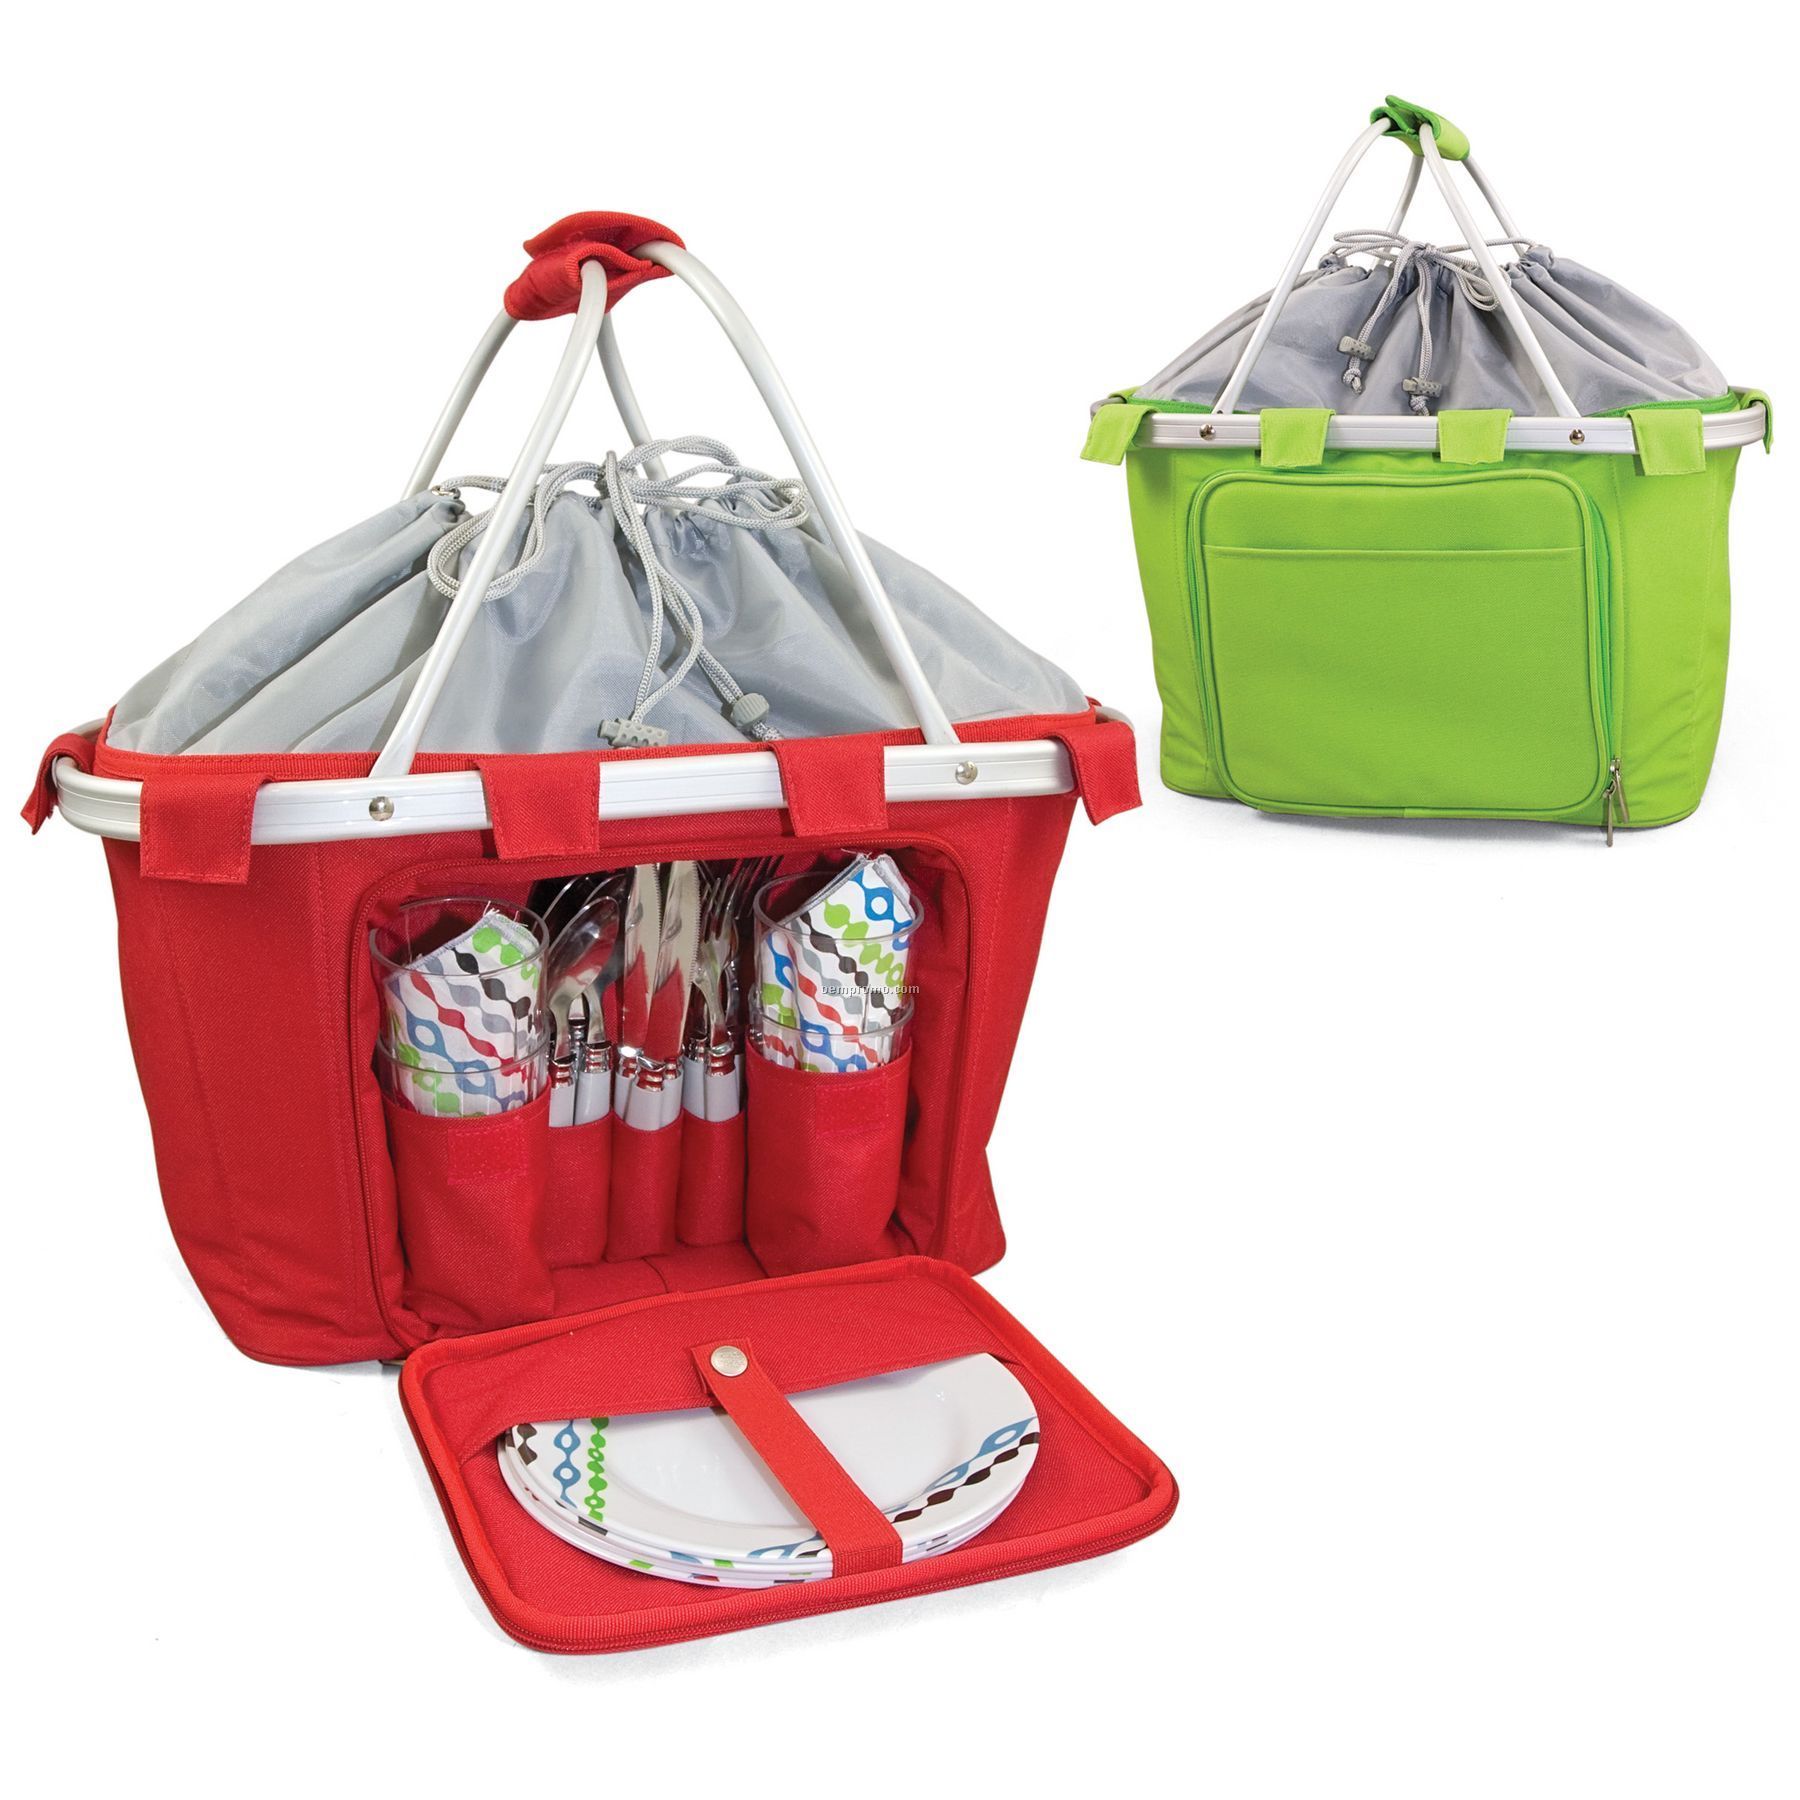 Metro Melrose Picnic Cooler Basket W/ Service For 4 - Red Or Geo (24 Can)